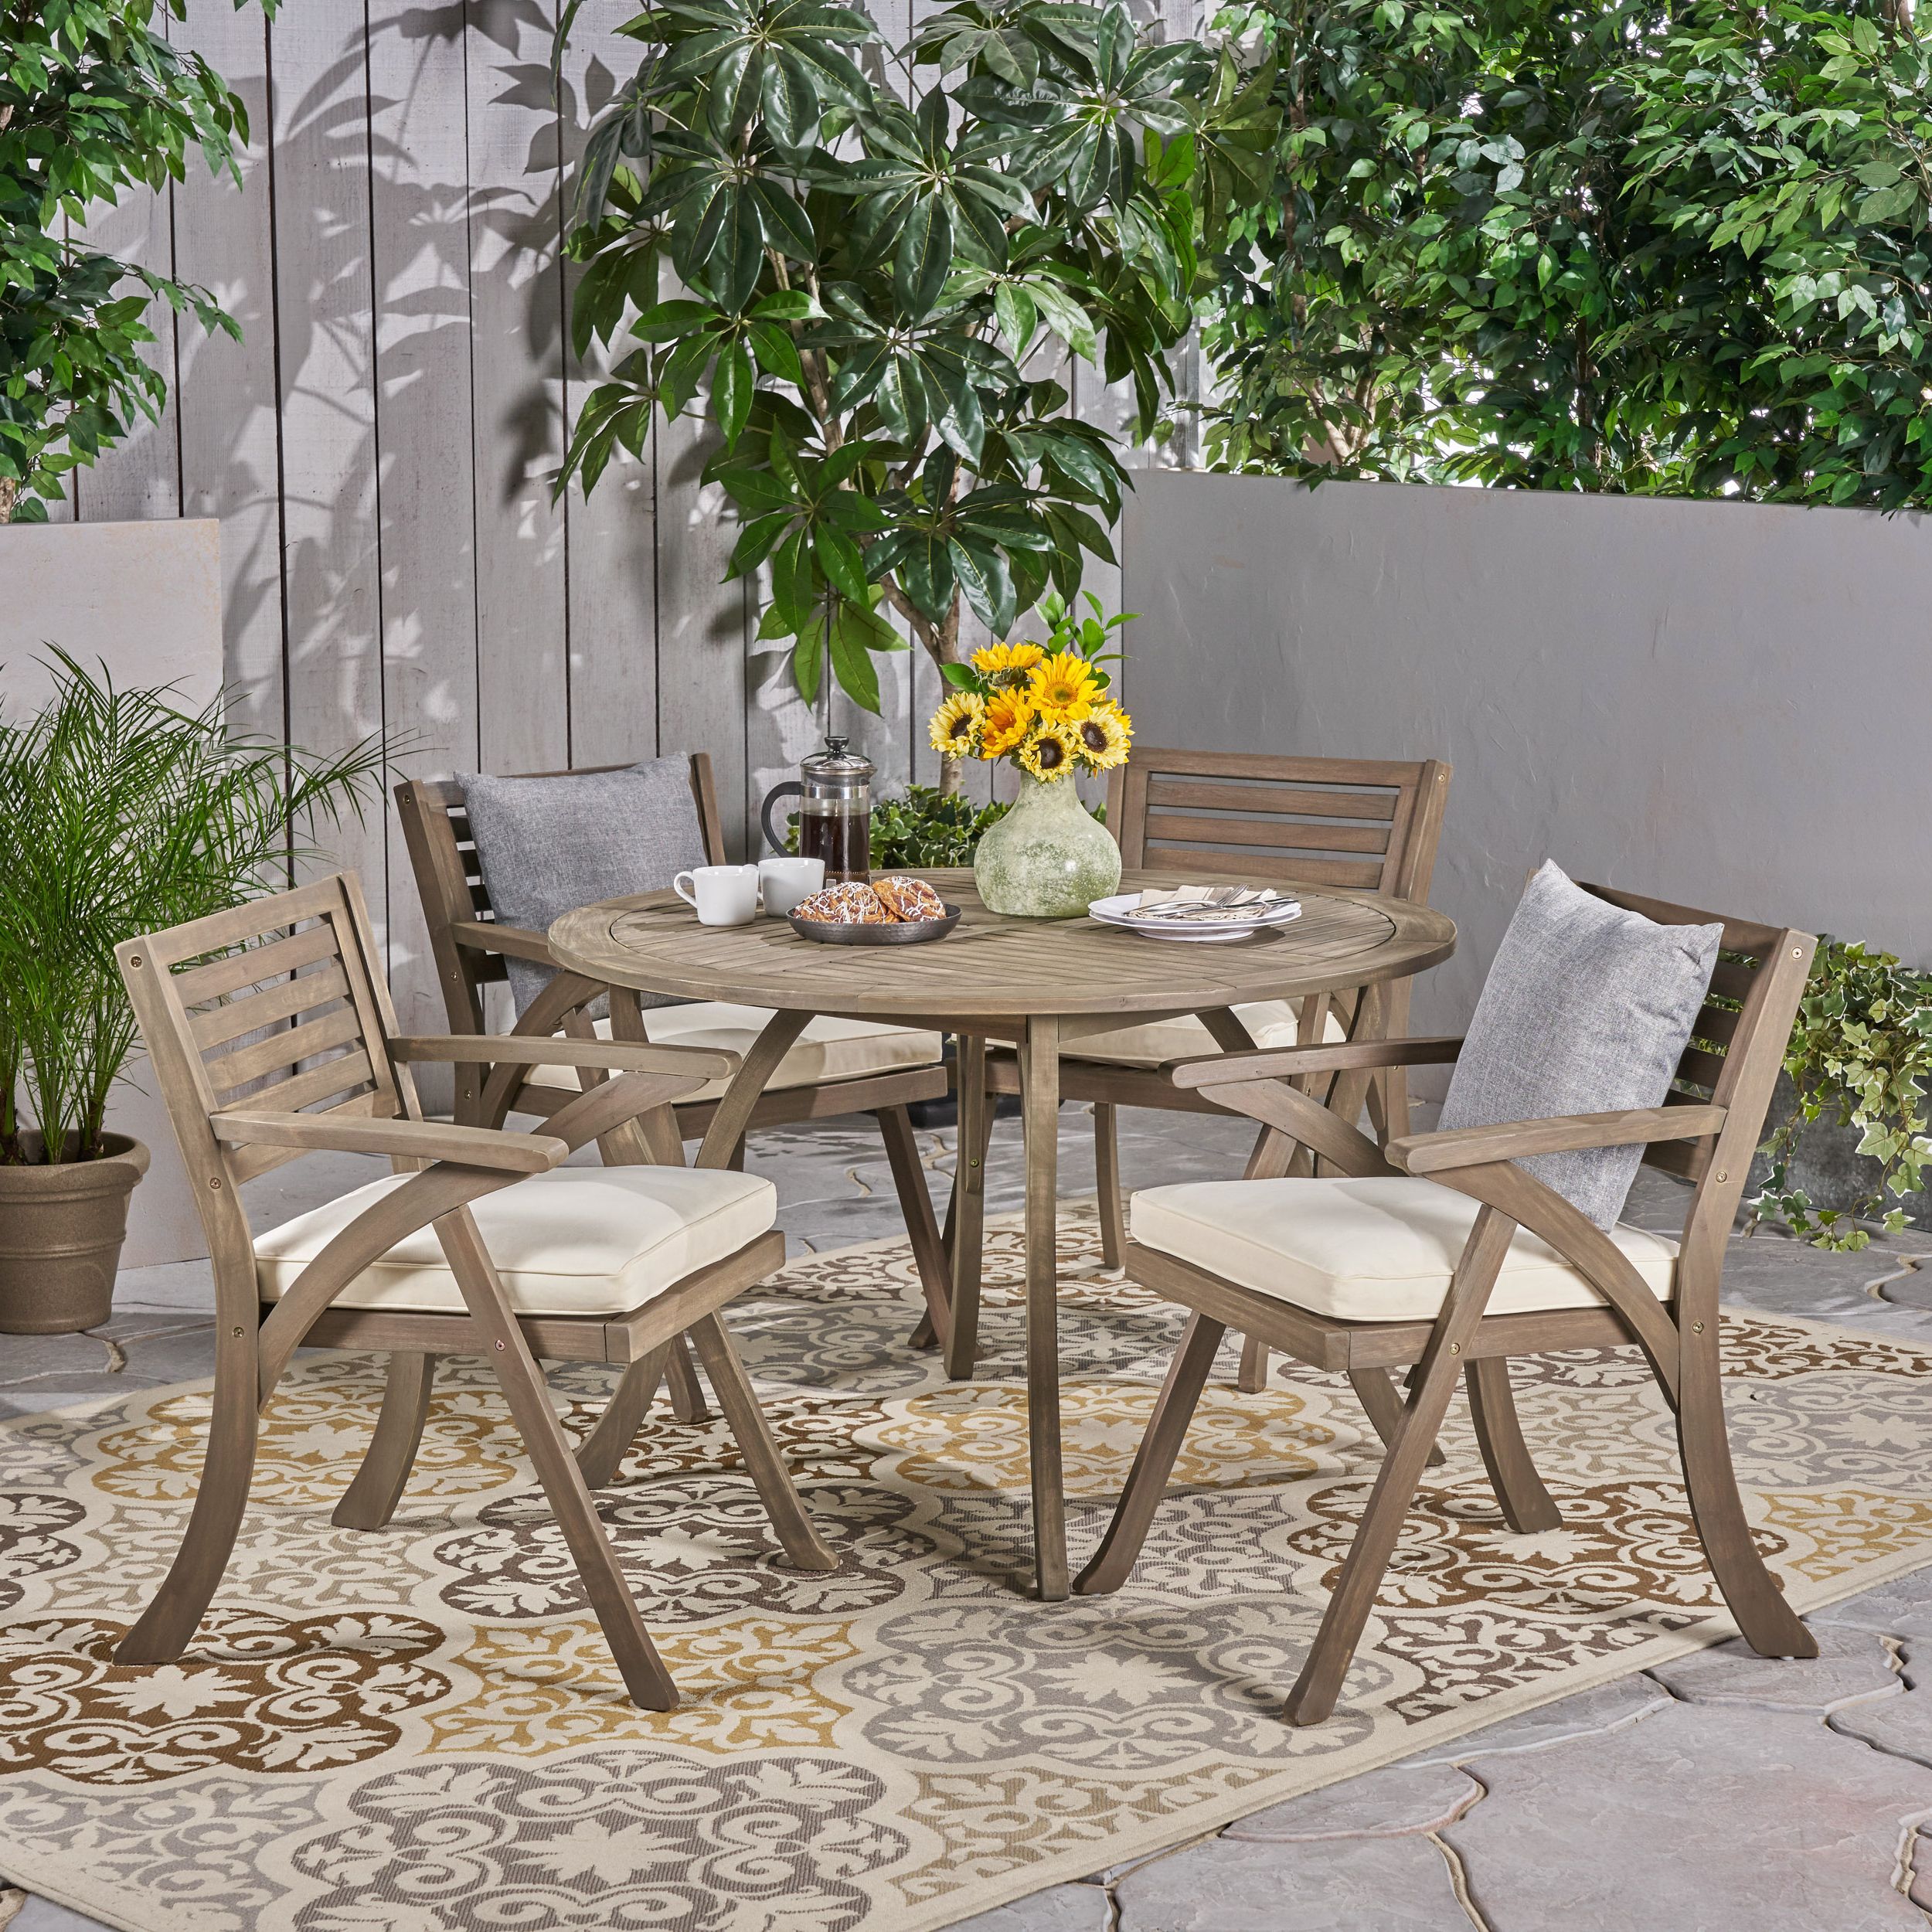 Round 5 Piece Outdoor Dining Set Intended For Best And Newest Jordy Outdoor 5 Piece Acacia Wood Dining Set With Round Table, Gray (View 4 of 15)